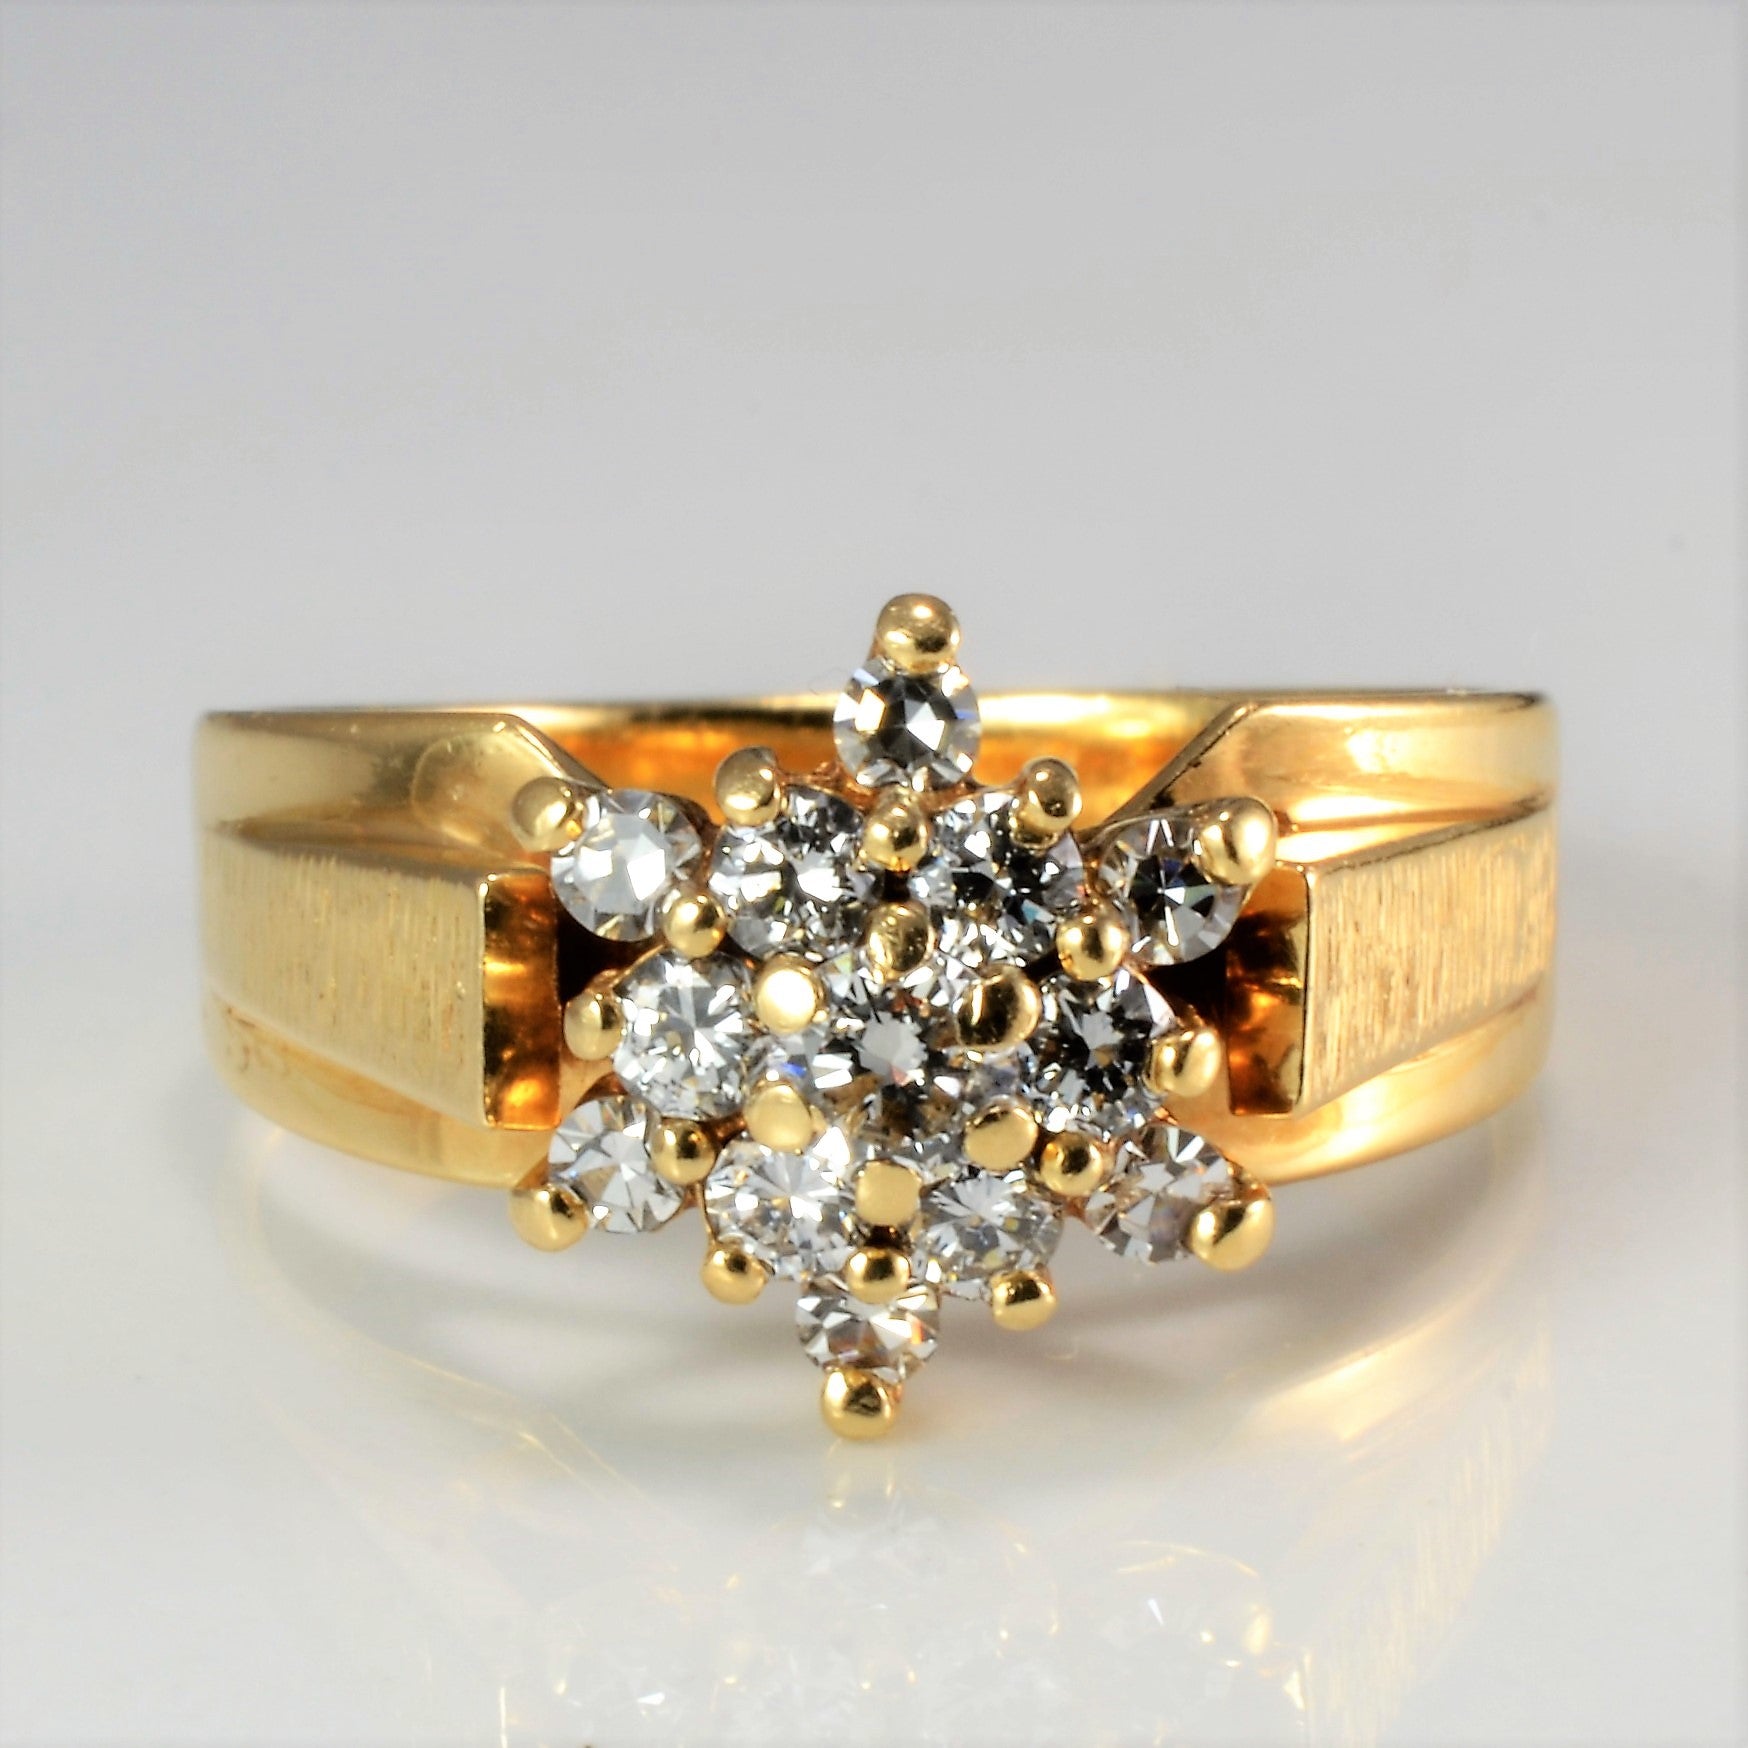 Tapered Cluster Diamond Ring | 0.42 ctw, SZ 6.75 |